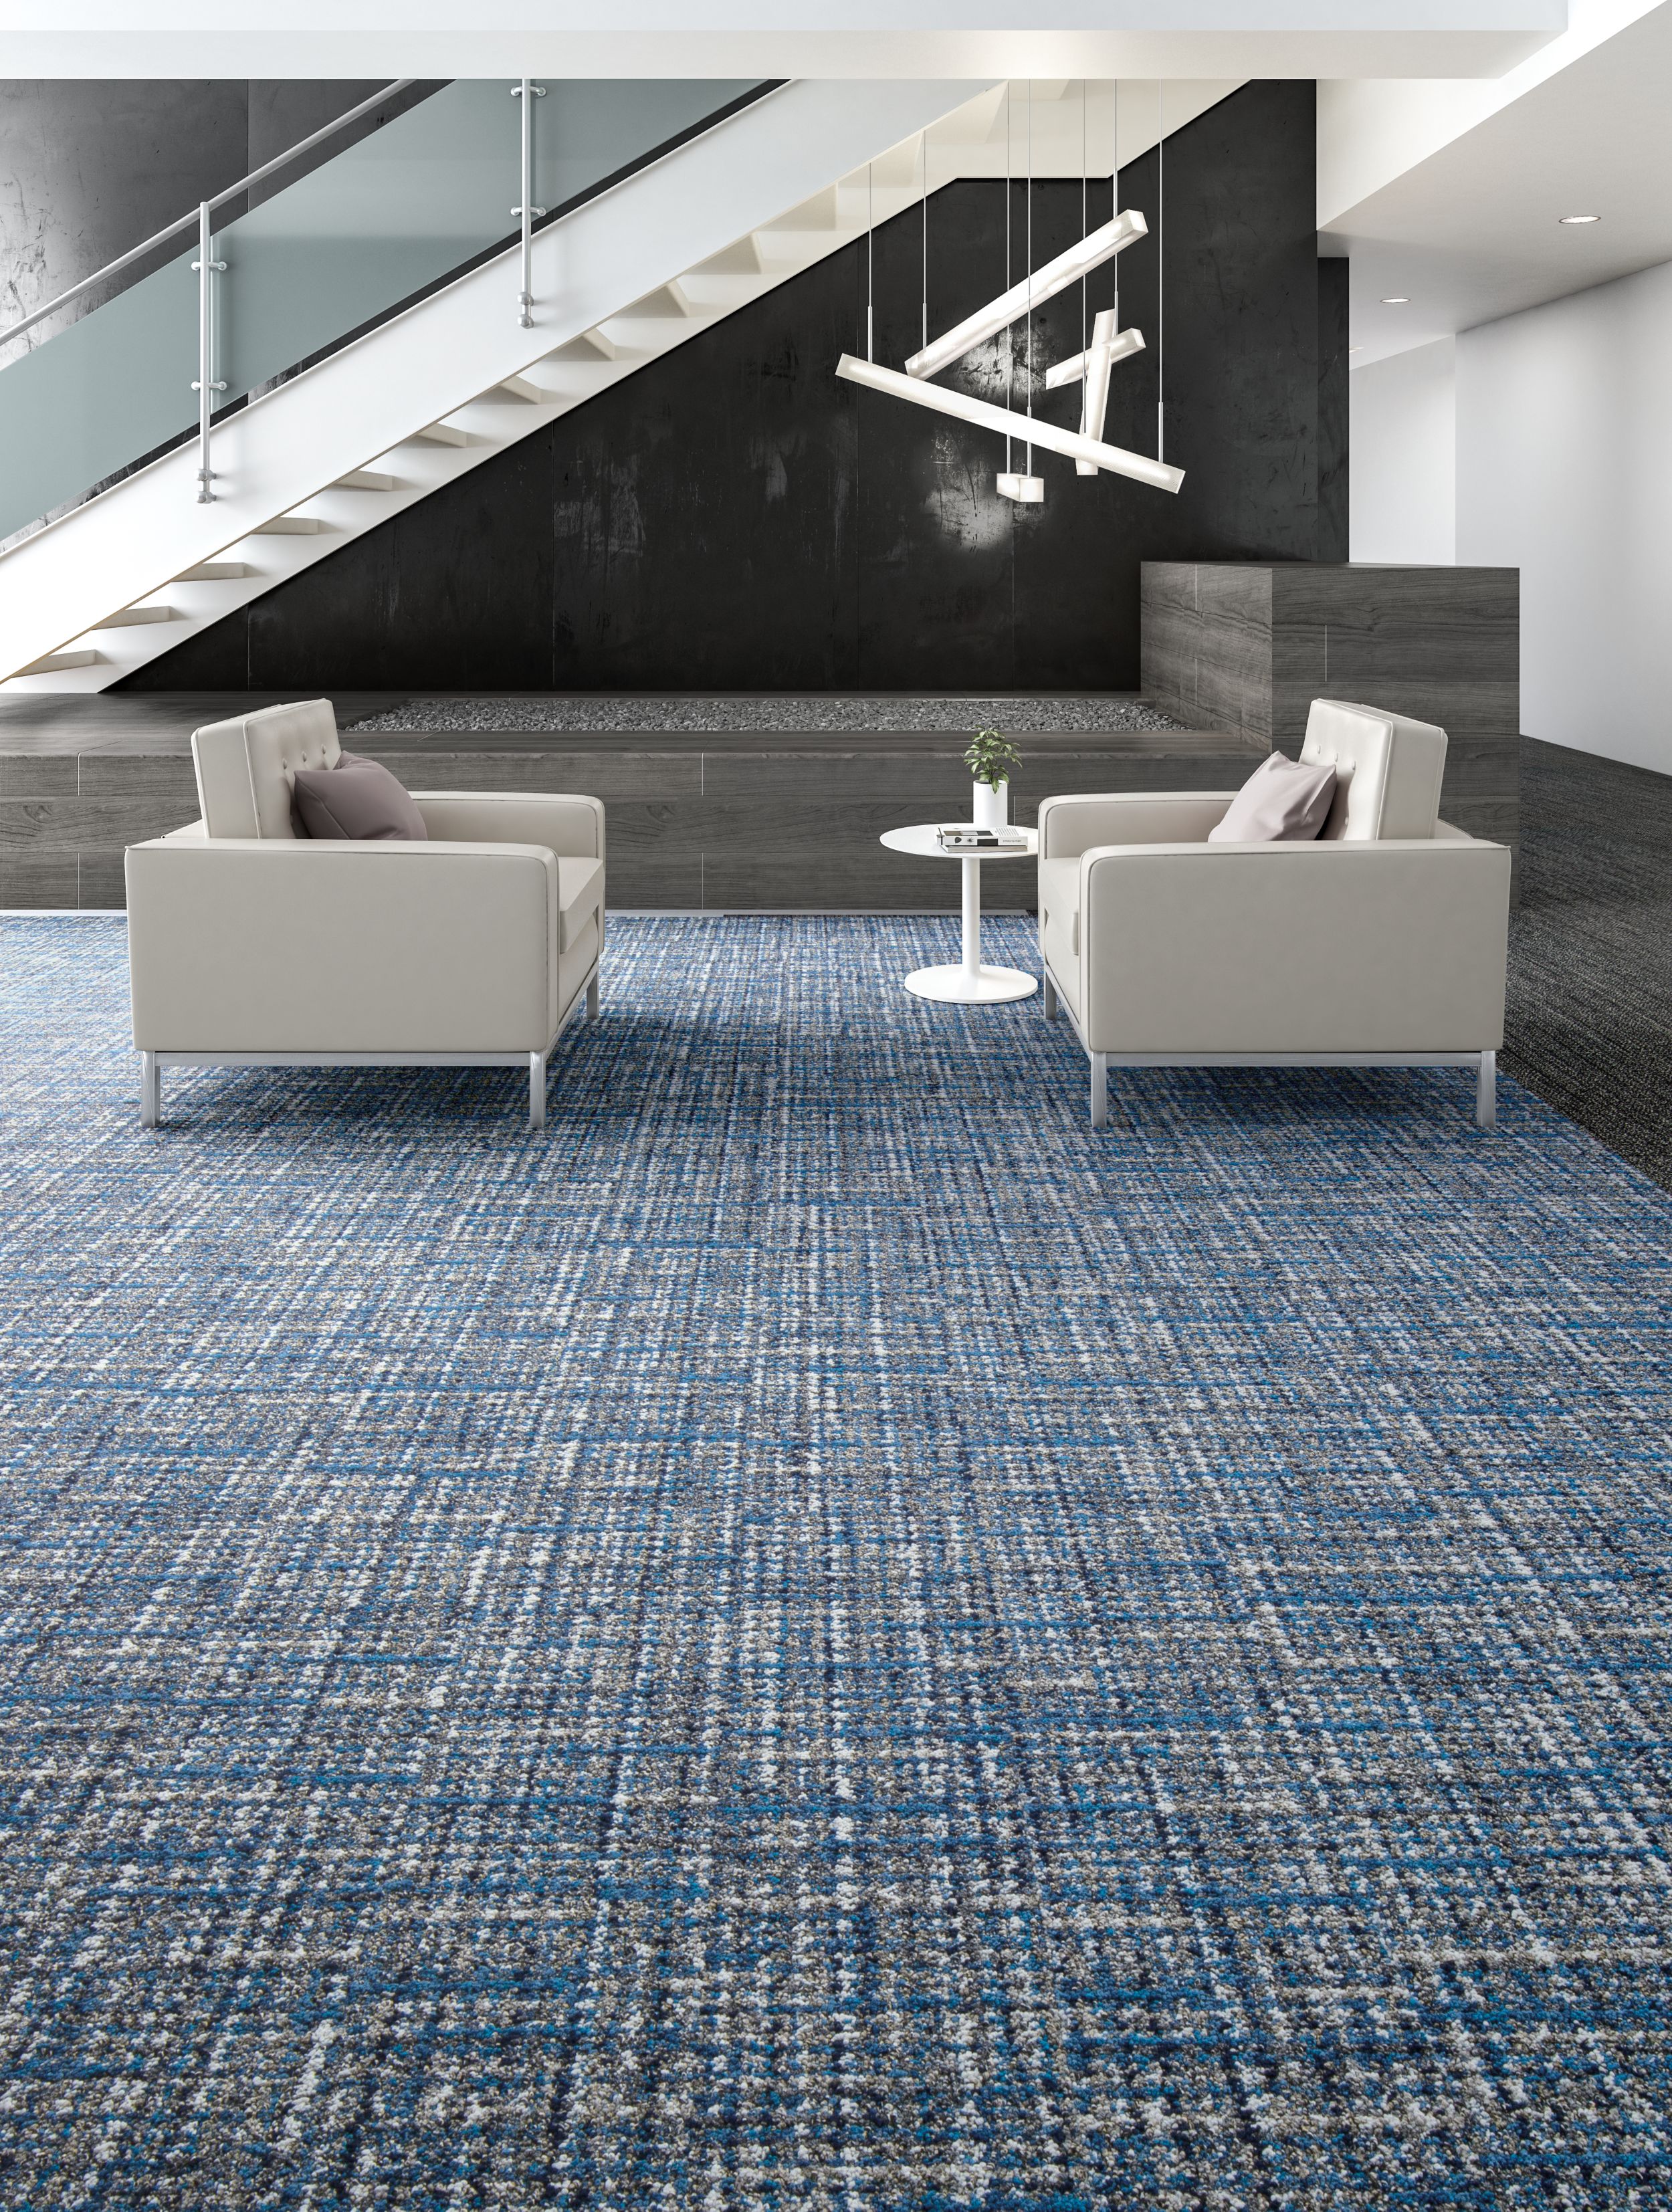 Interface WW895 plank carpet tile in lobby area with couches and side table  numéro d’image 12